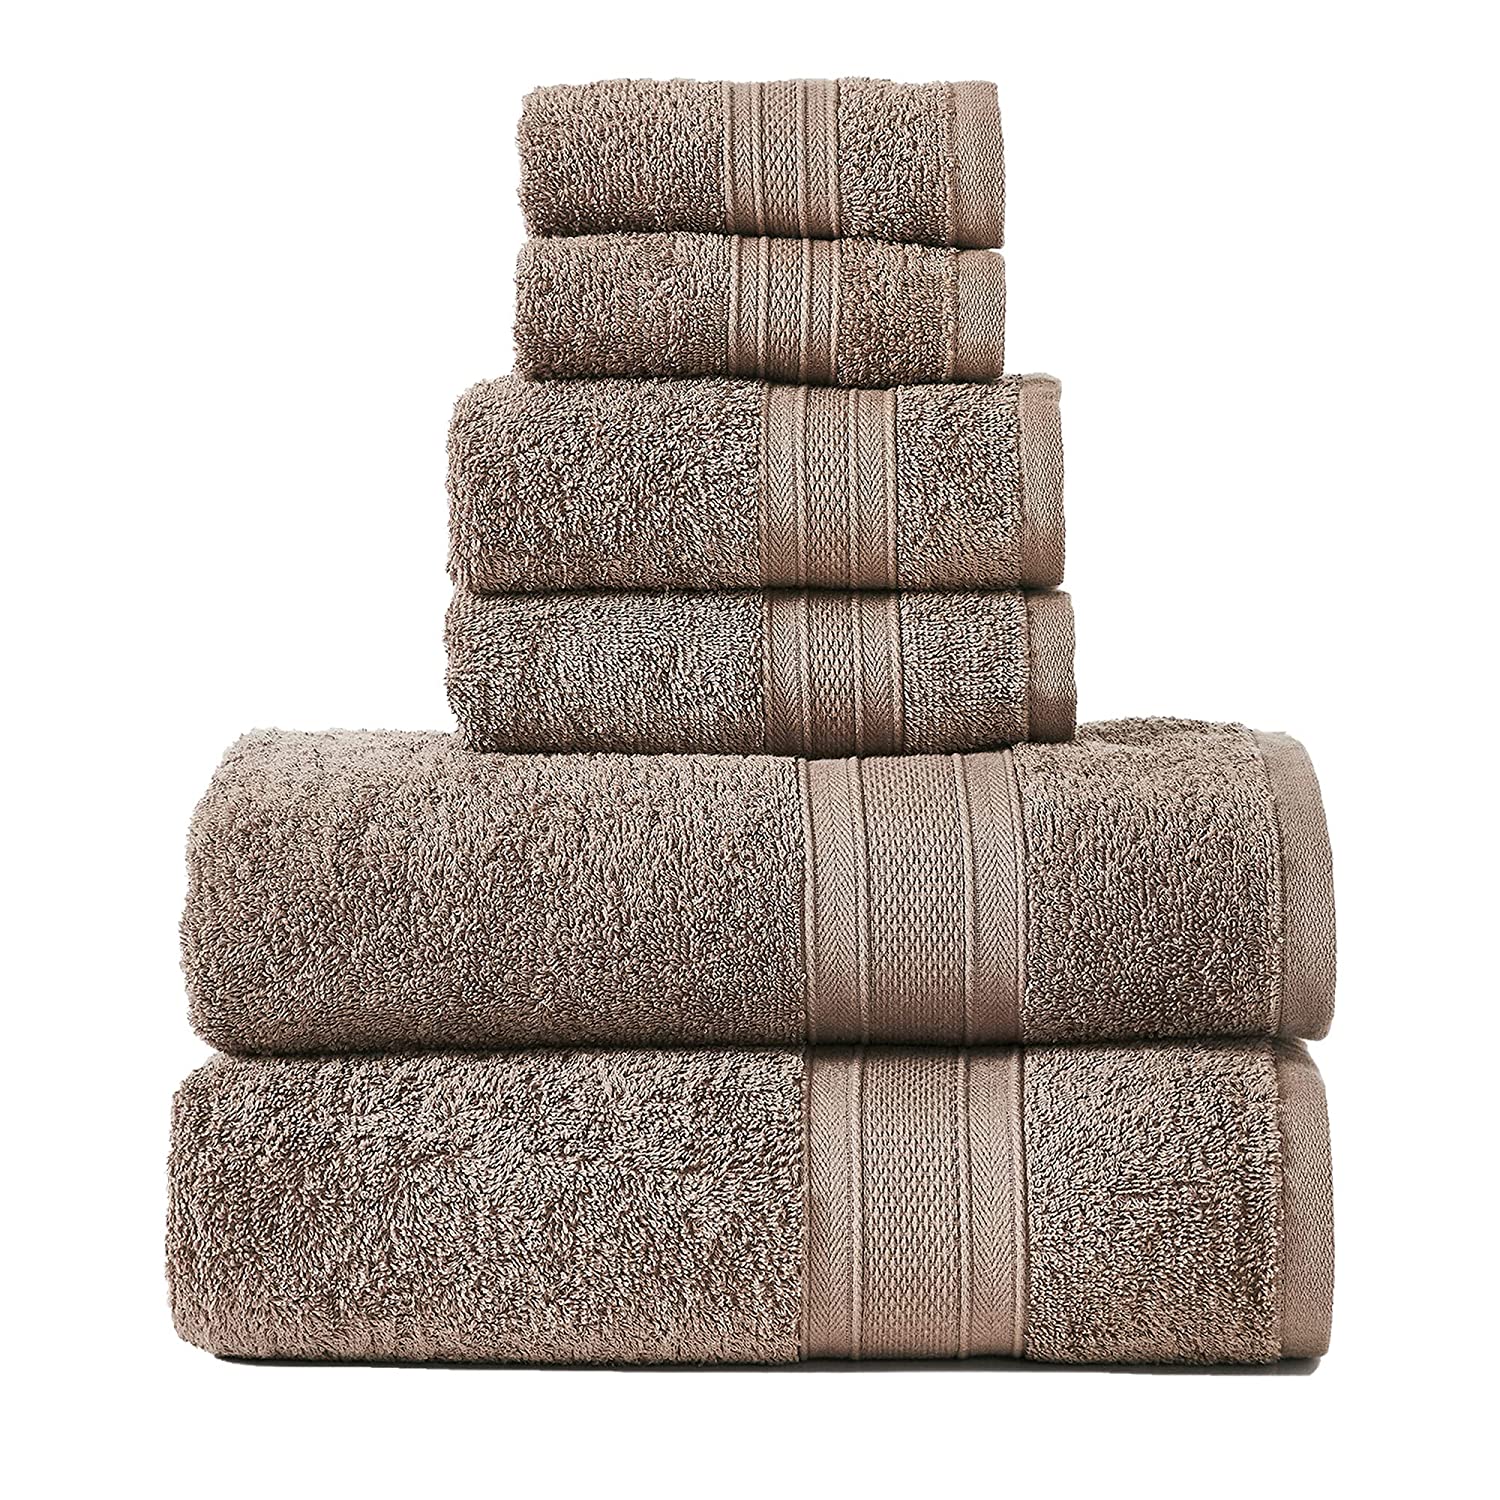 Trident Soft and Plush Bathroom Towels